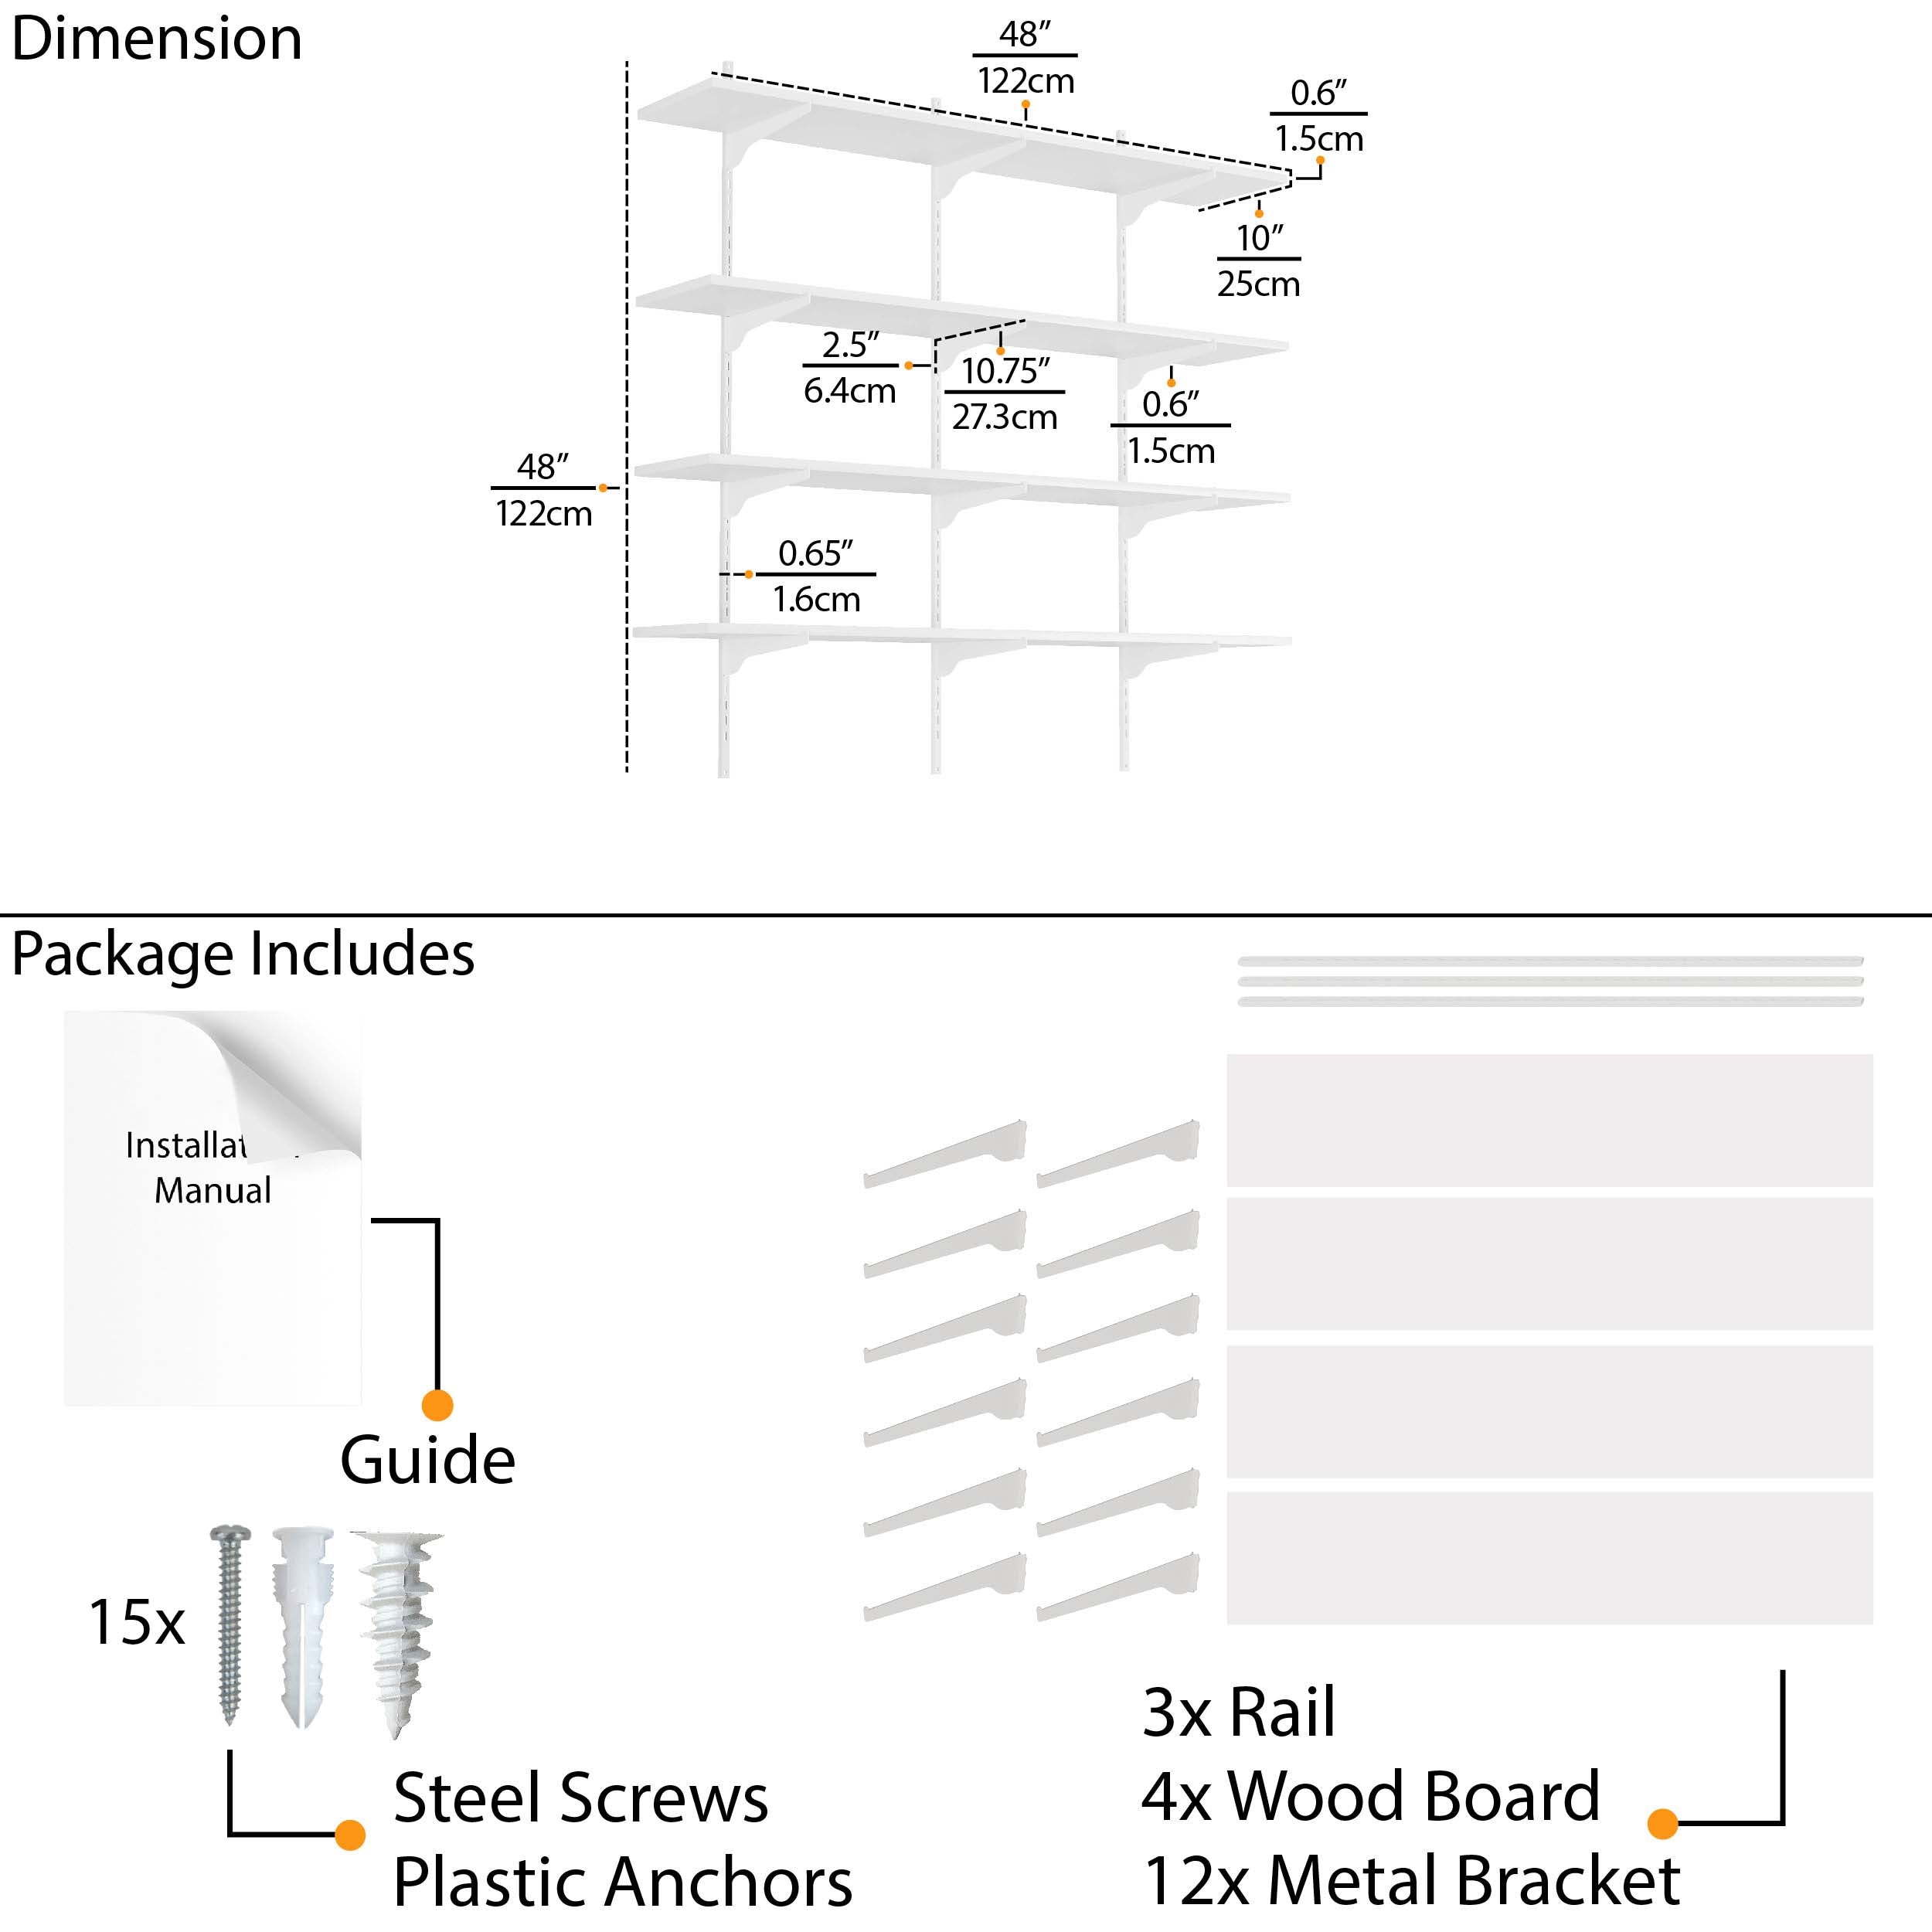 A diagram showing dimensions and parts of a 48'' white floating shelves with wood finish, contents as screws, rails and anchors